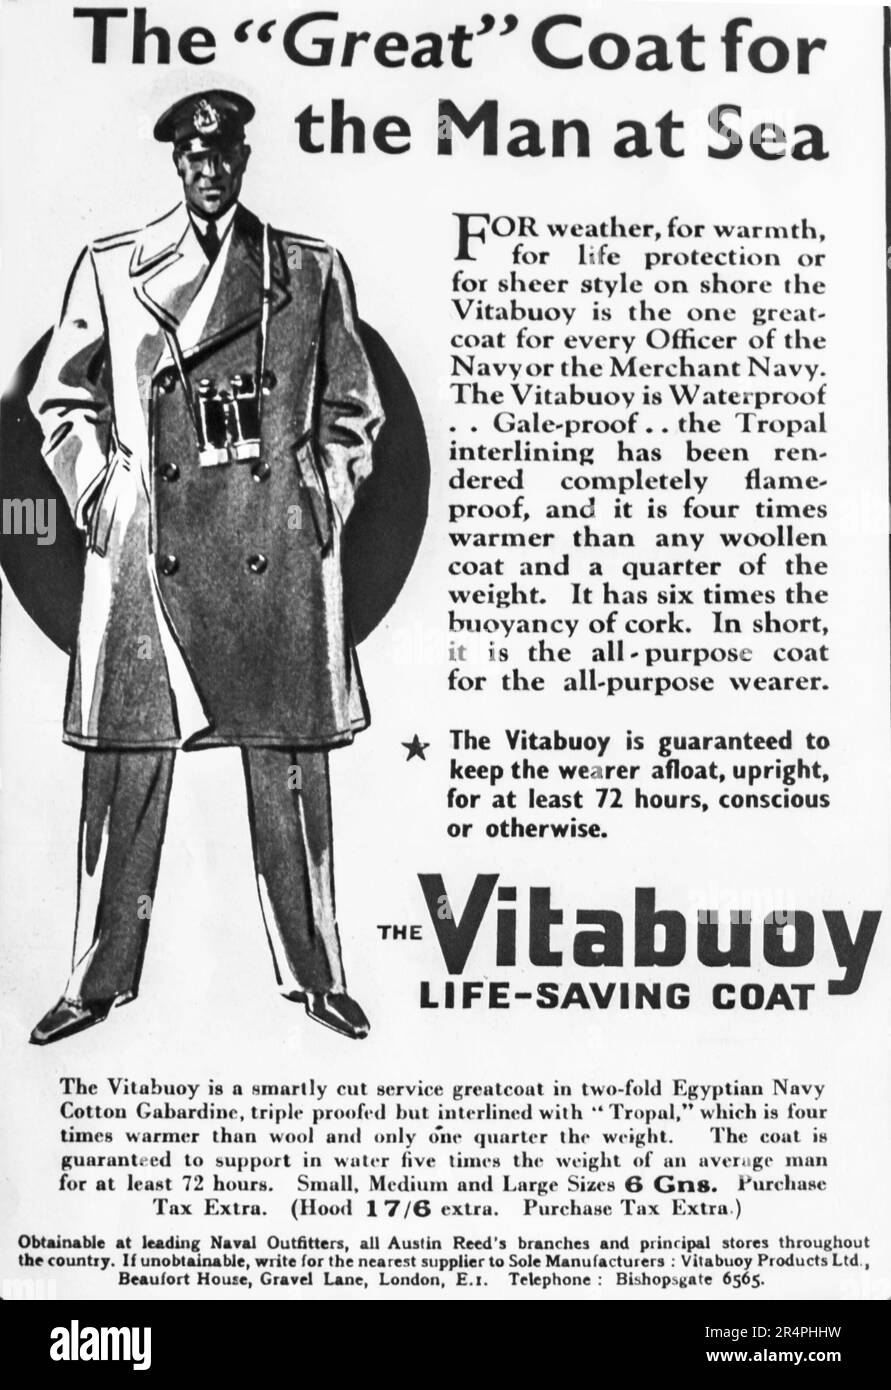 A 1942 advertisement for the Vitabuoy life saving coat, guaranteed to keep you afloat for at least 72 hours, conscious or otherwise.The advertisement is aimed at naval personnel serving in World War 2. Stock Photo